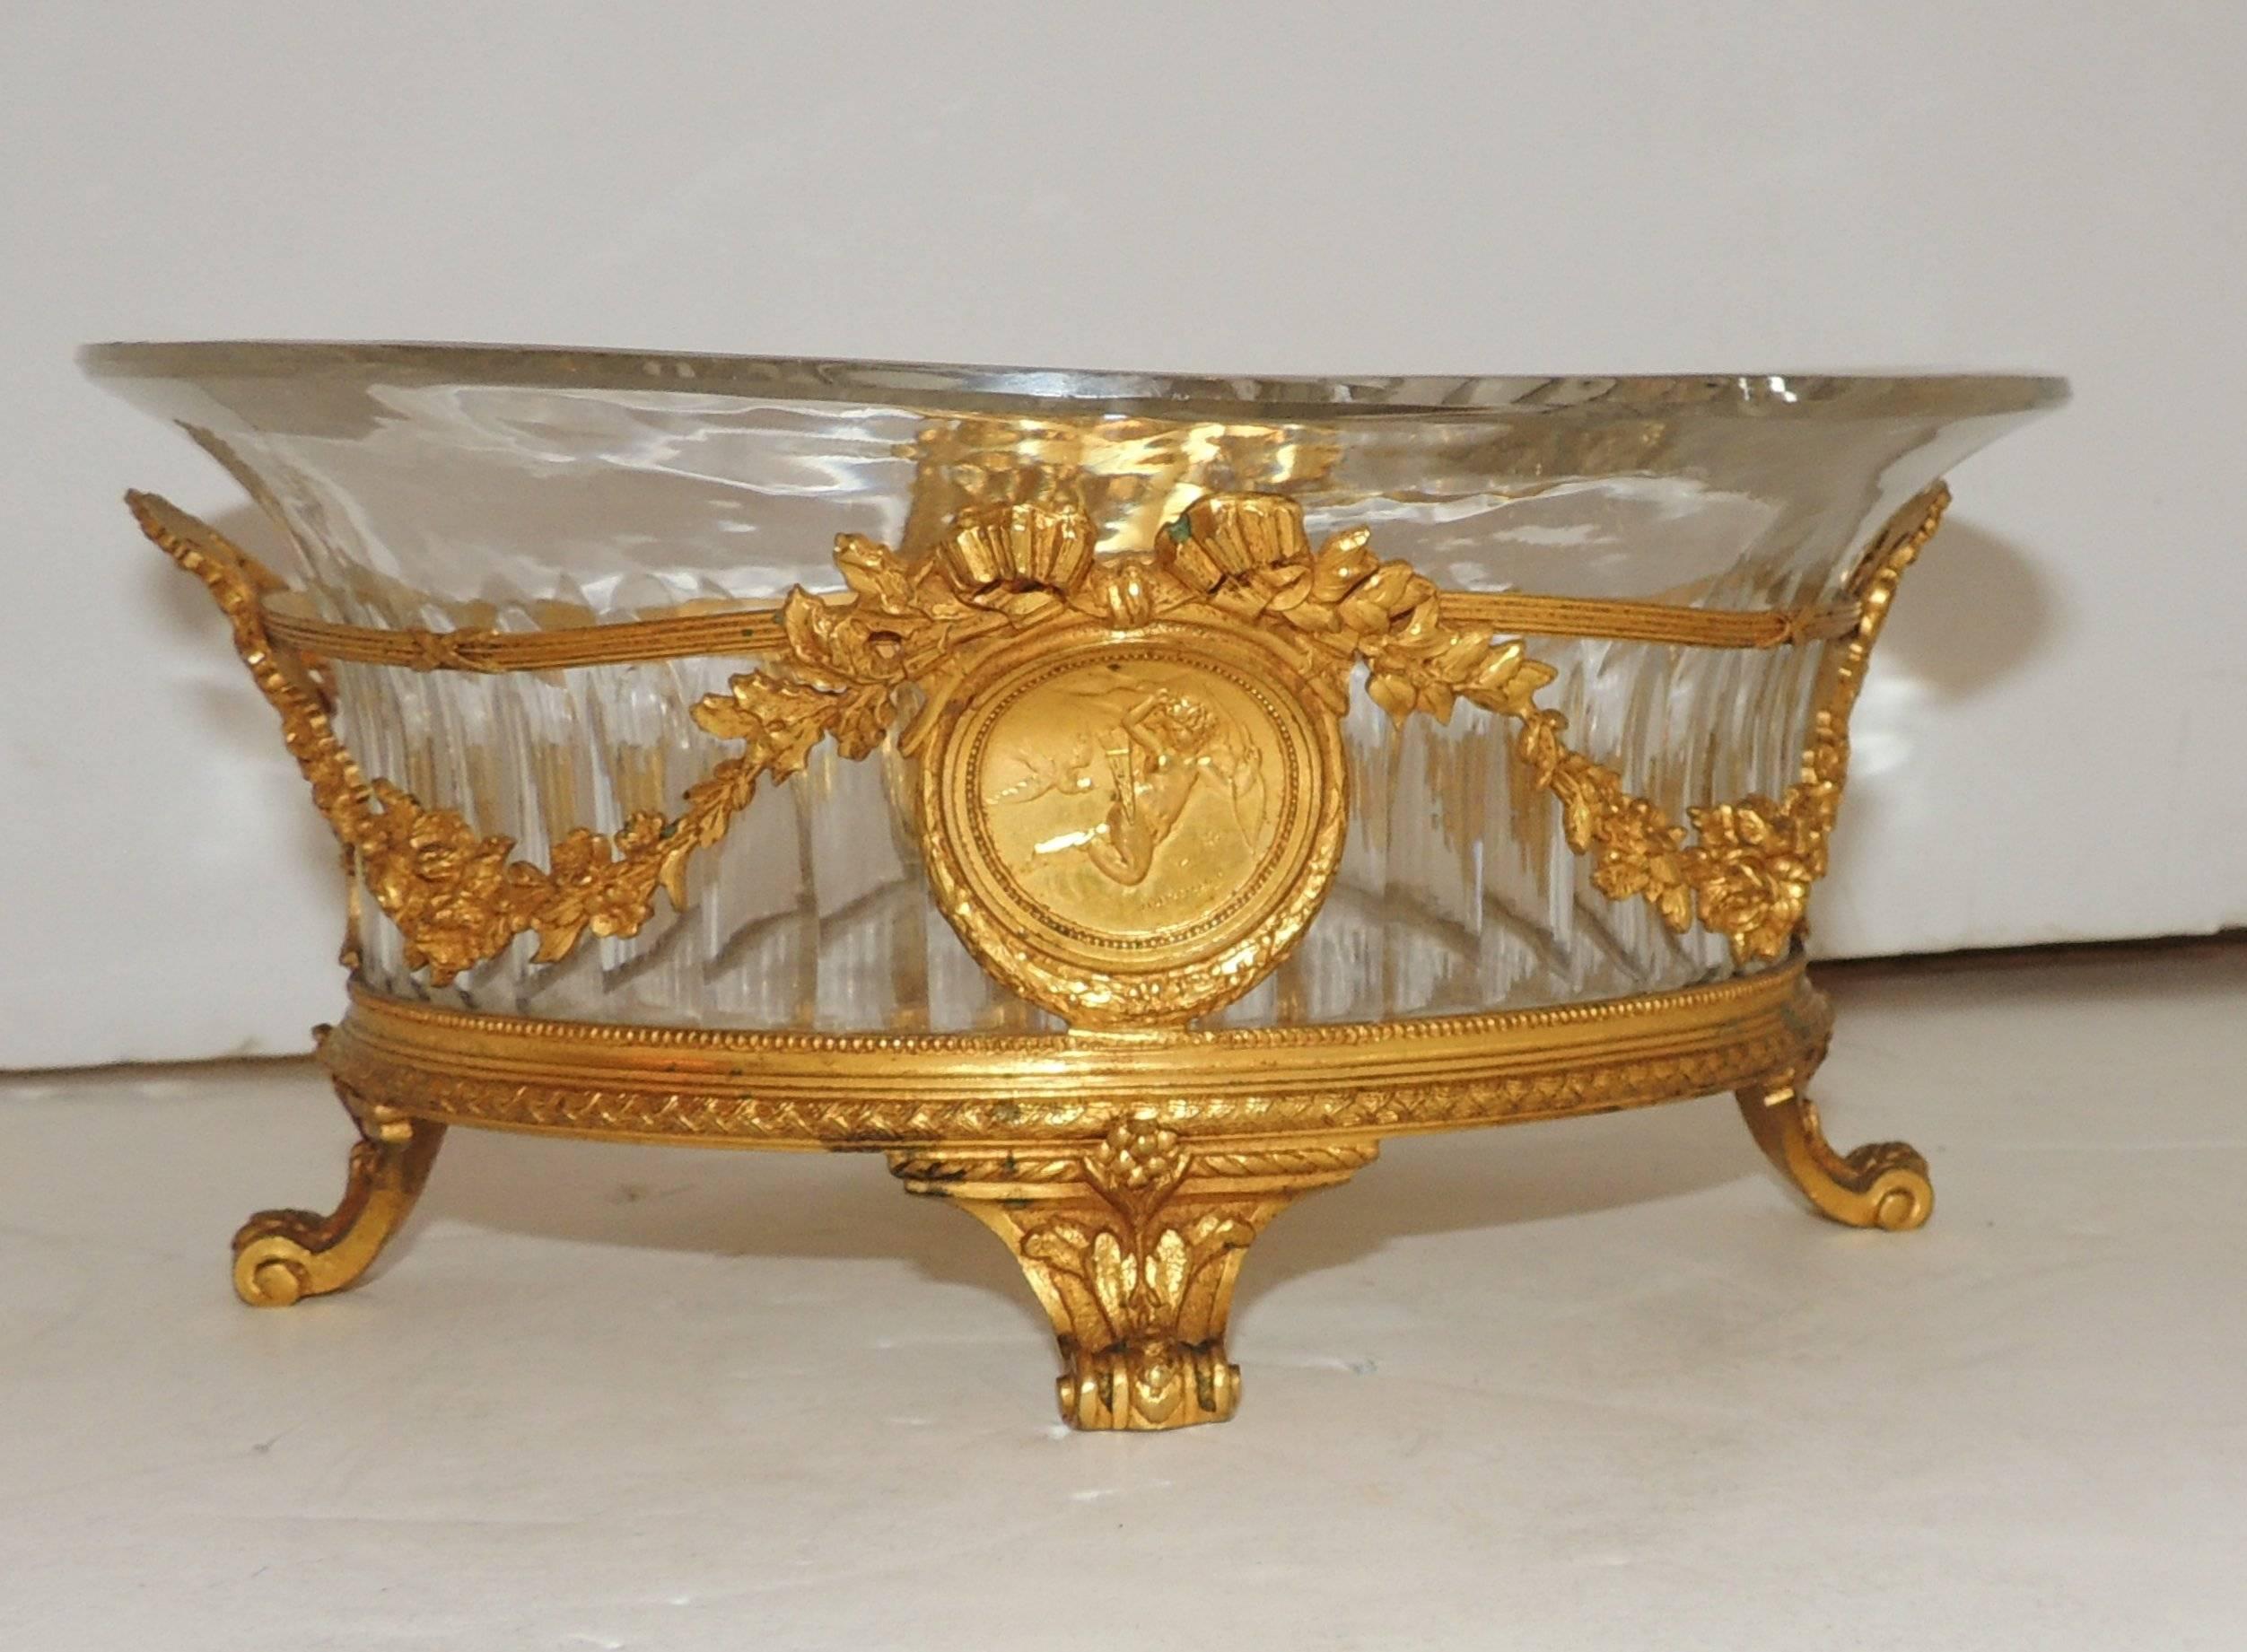 Wonderful French dore´ bronze bow and swag footed Cherub Plaques centerpiece with fluted oval crystal insert.
In the manner of Baccarat.

Measures: 8